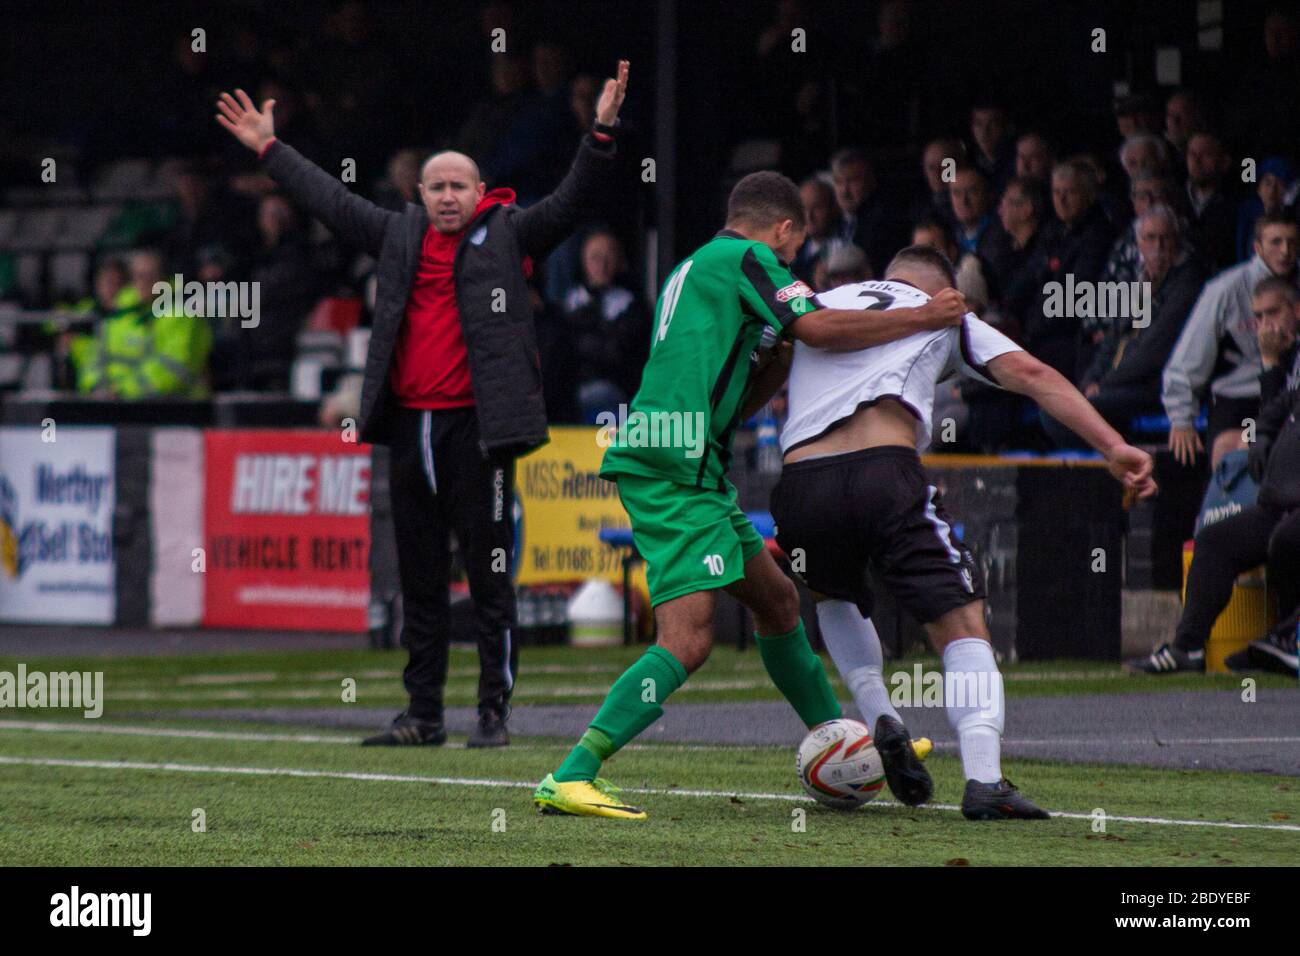 Merthyr Town v Cinderford at Penydarren Park in the FA Cup on the 29th October 2016. Stock Photo